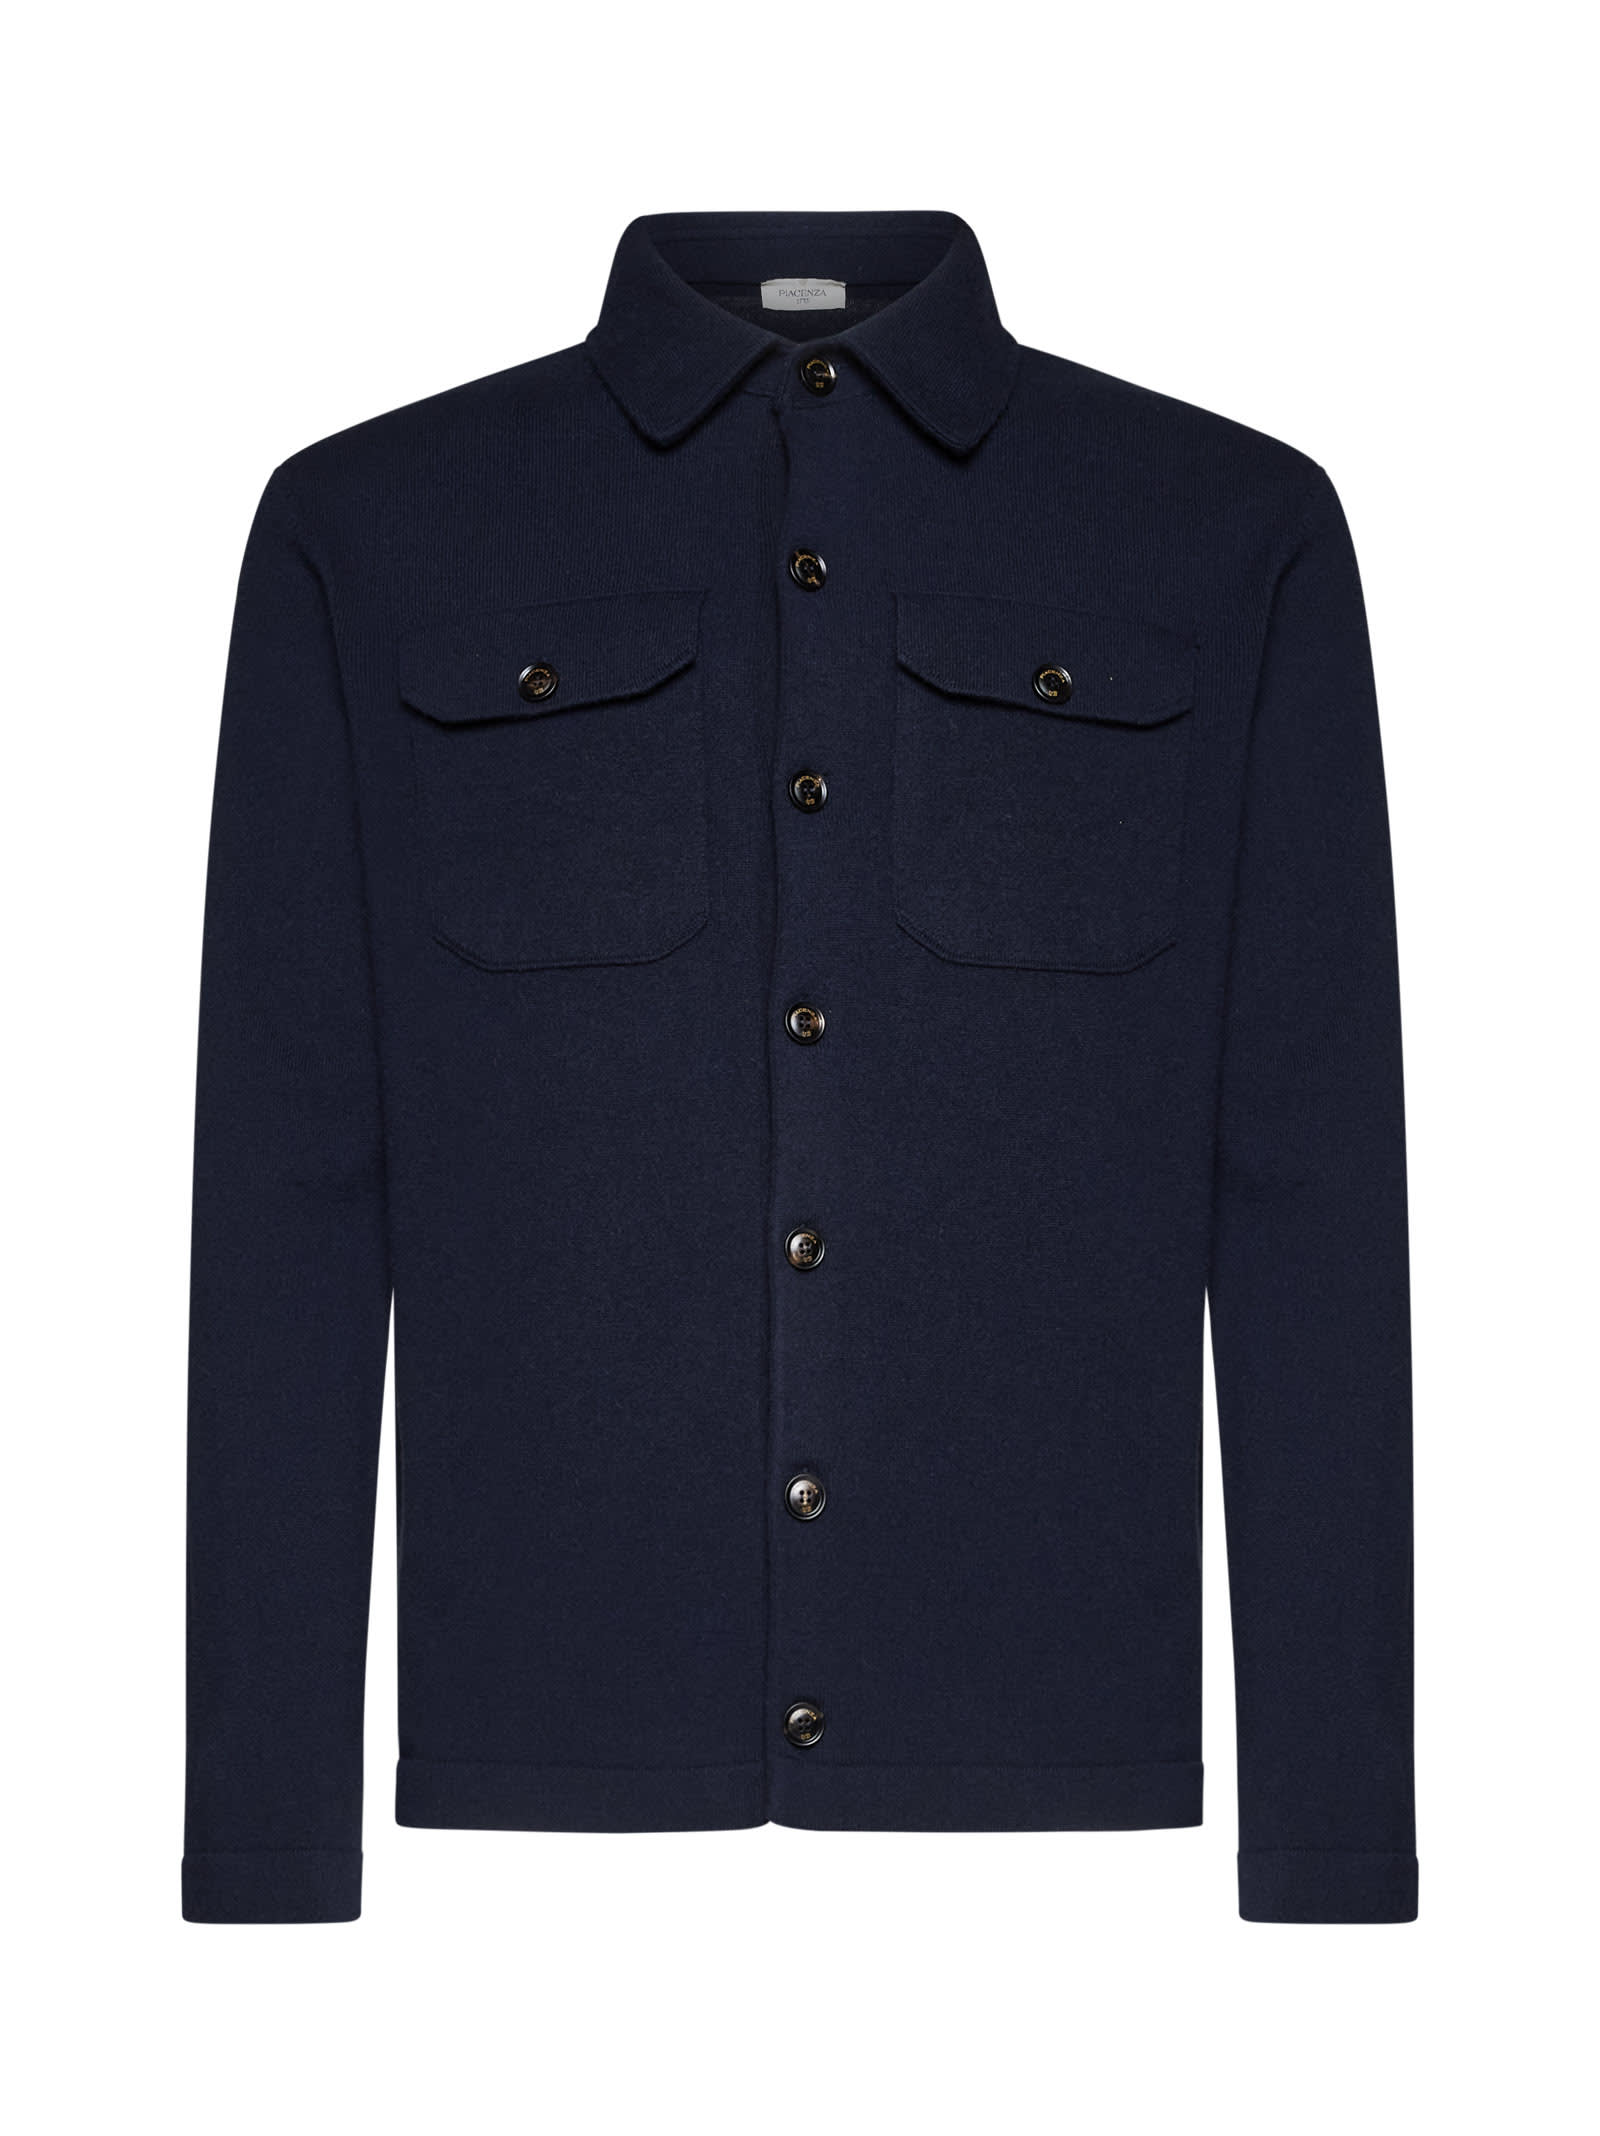 Piacenza Cashmere Shirt In Blue Navy